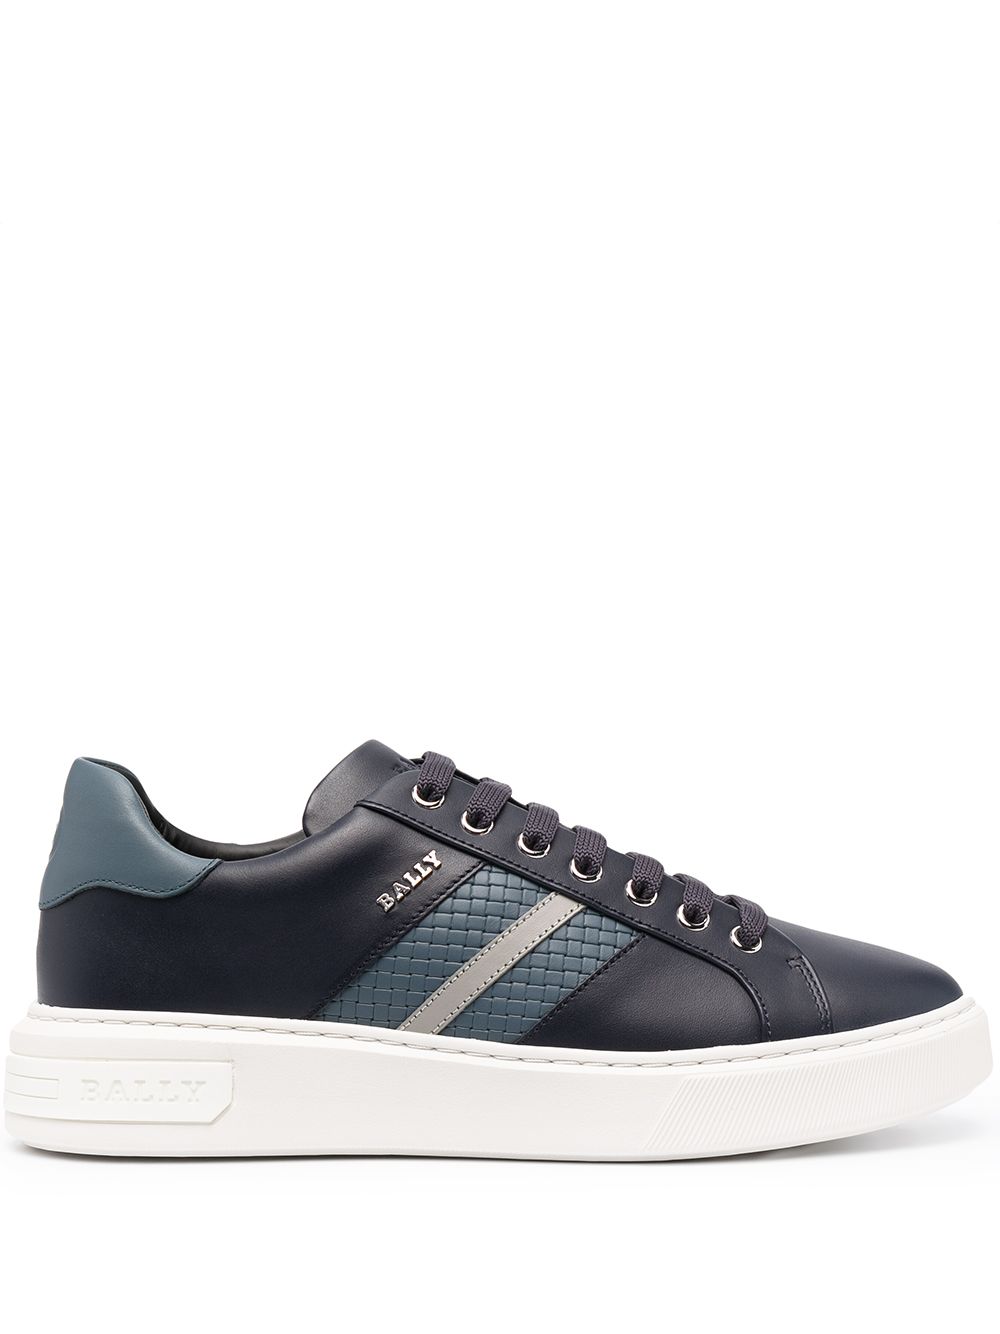 Bally Marcus Striped Tape Chunky Sneakers - Farfetch